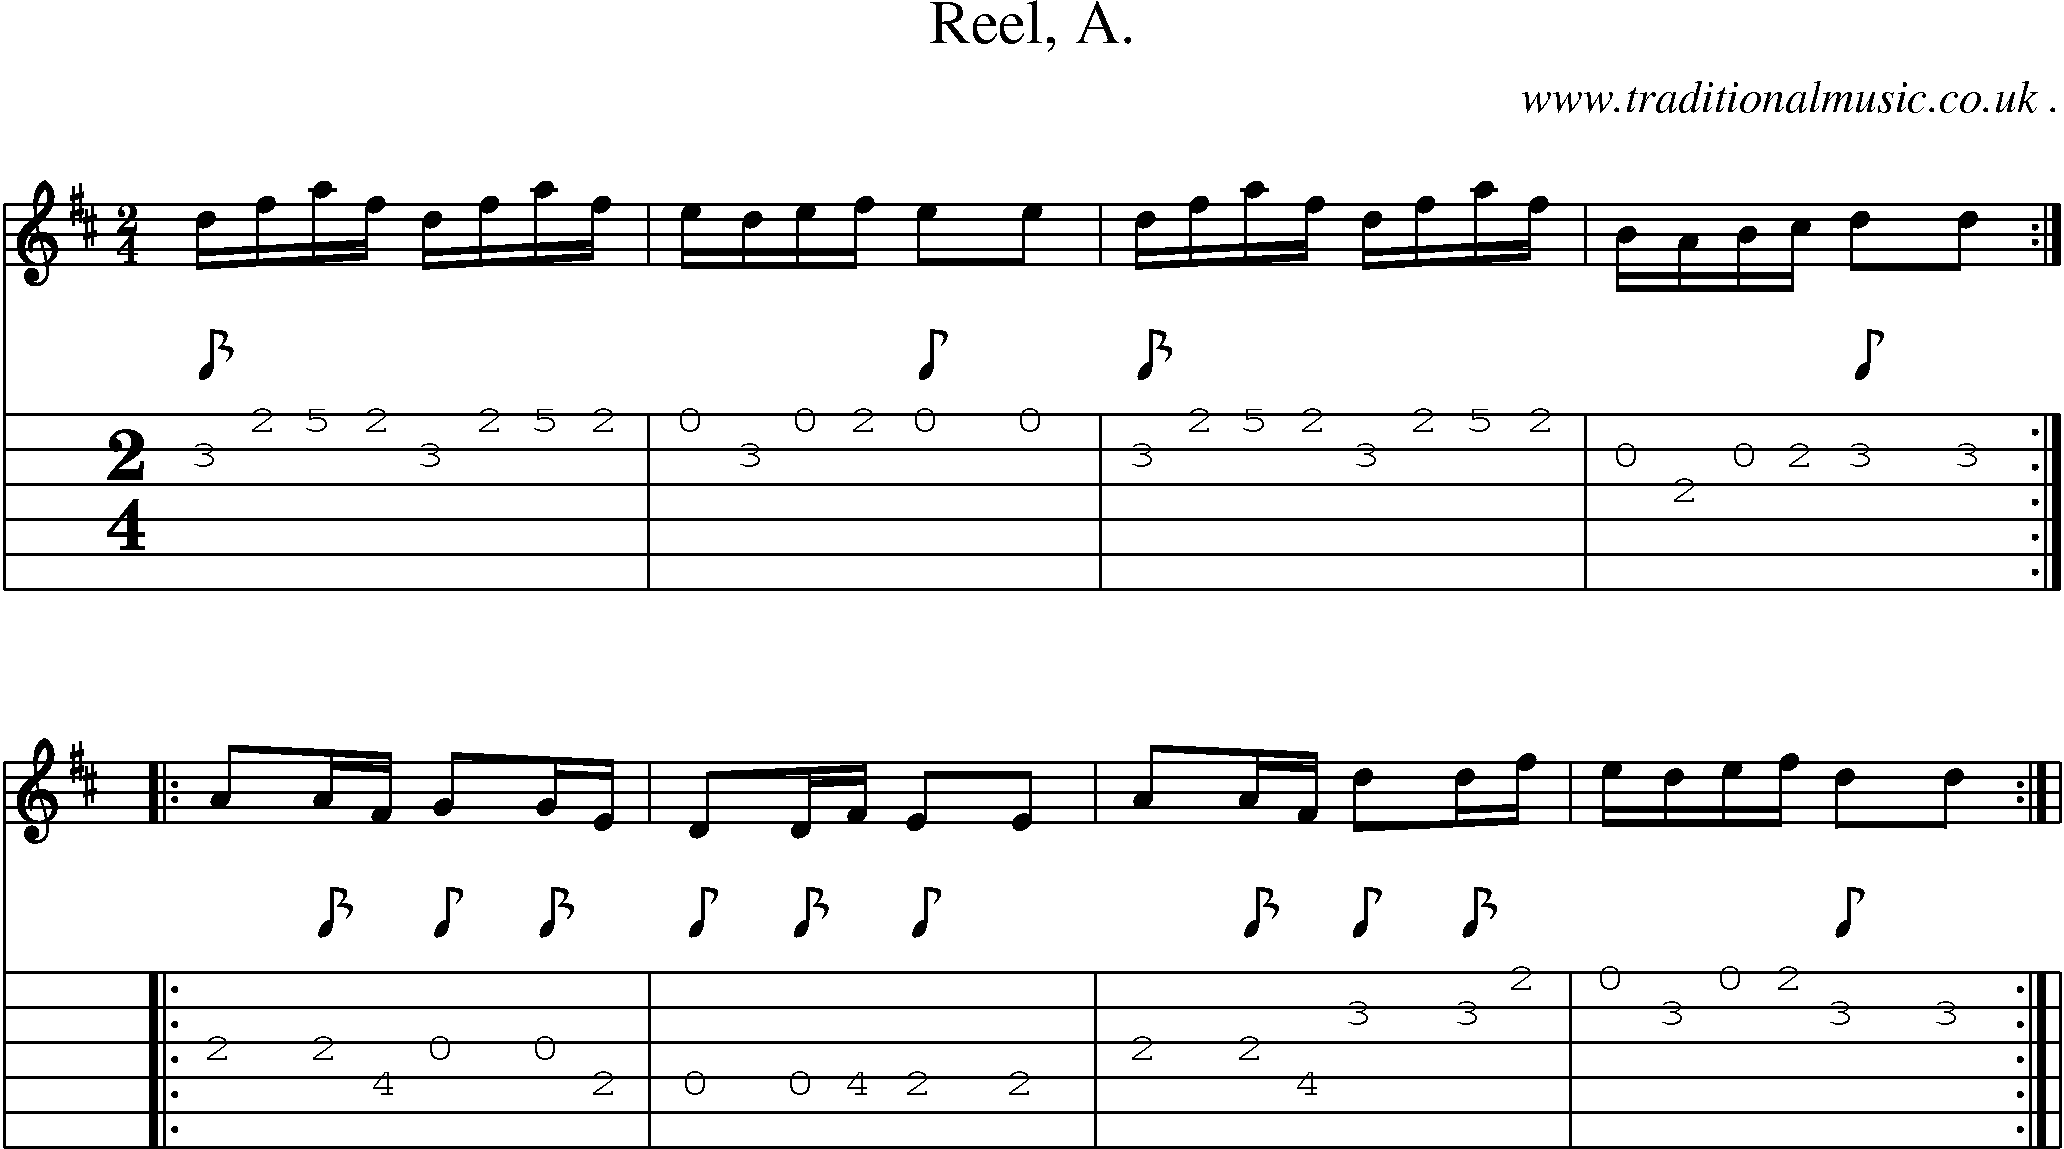 Sheet-Music and Guitar Tabs for Reel A